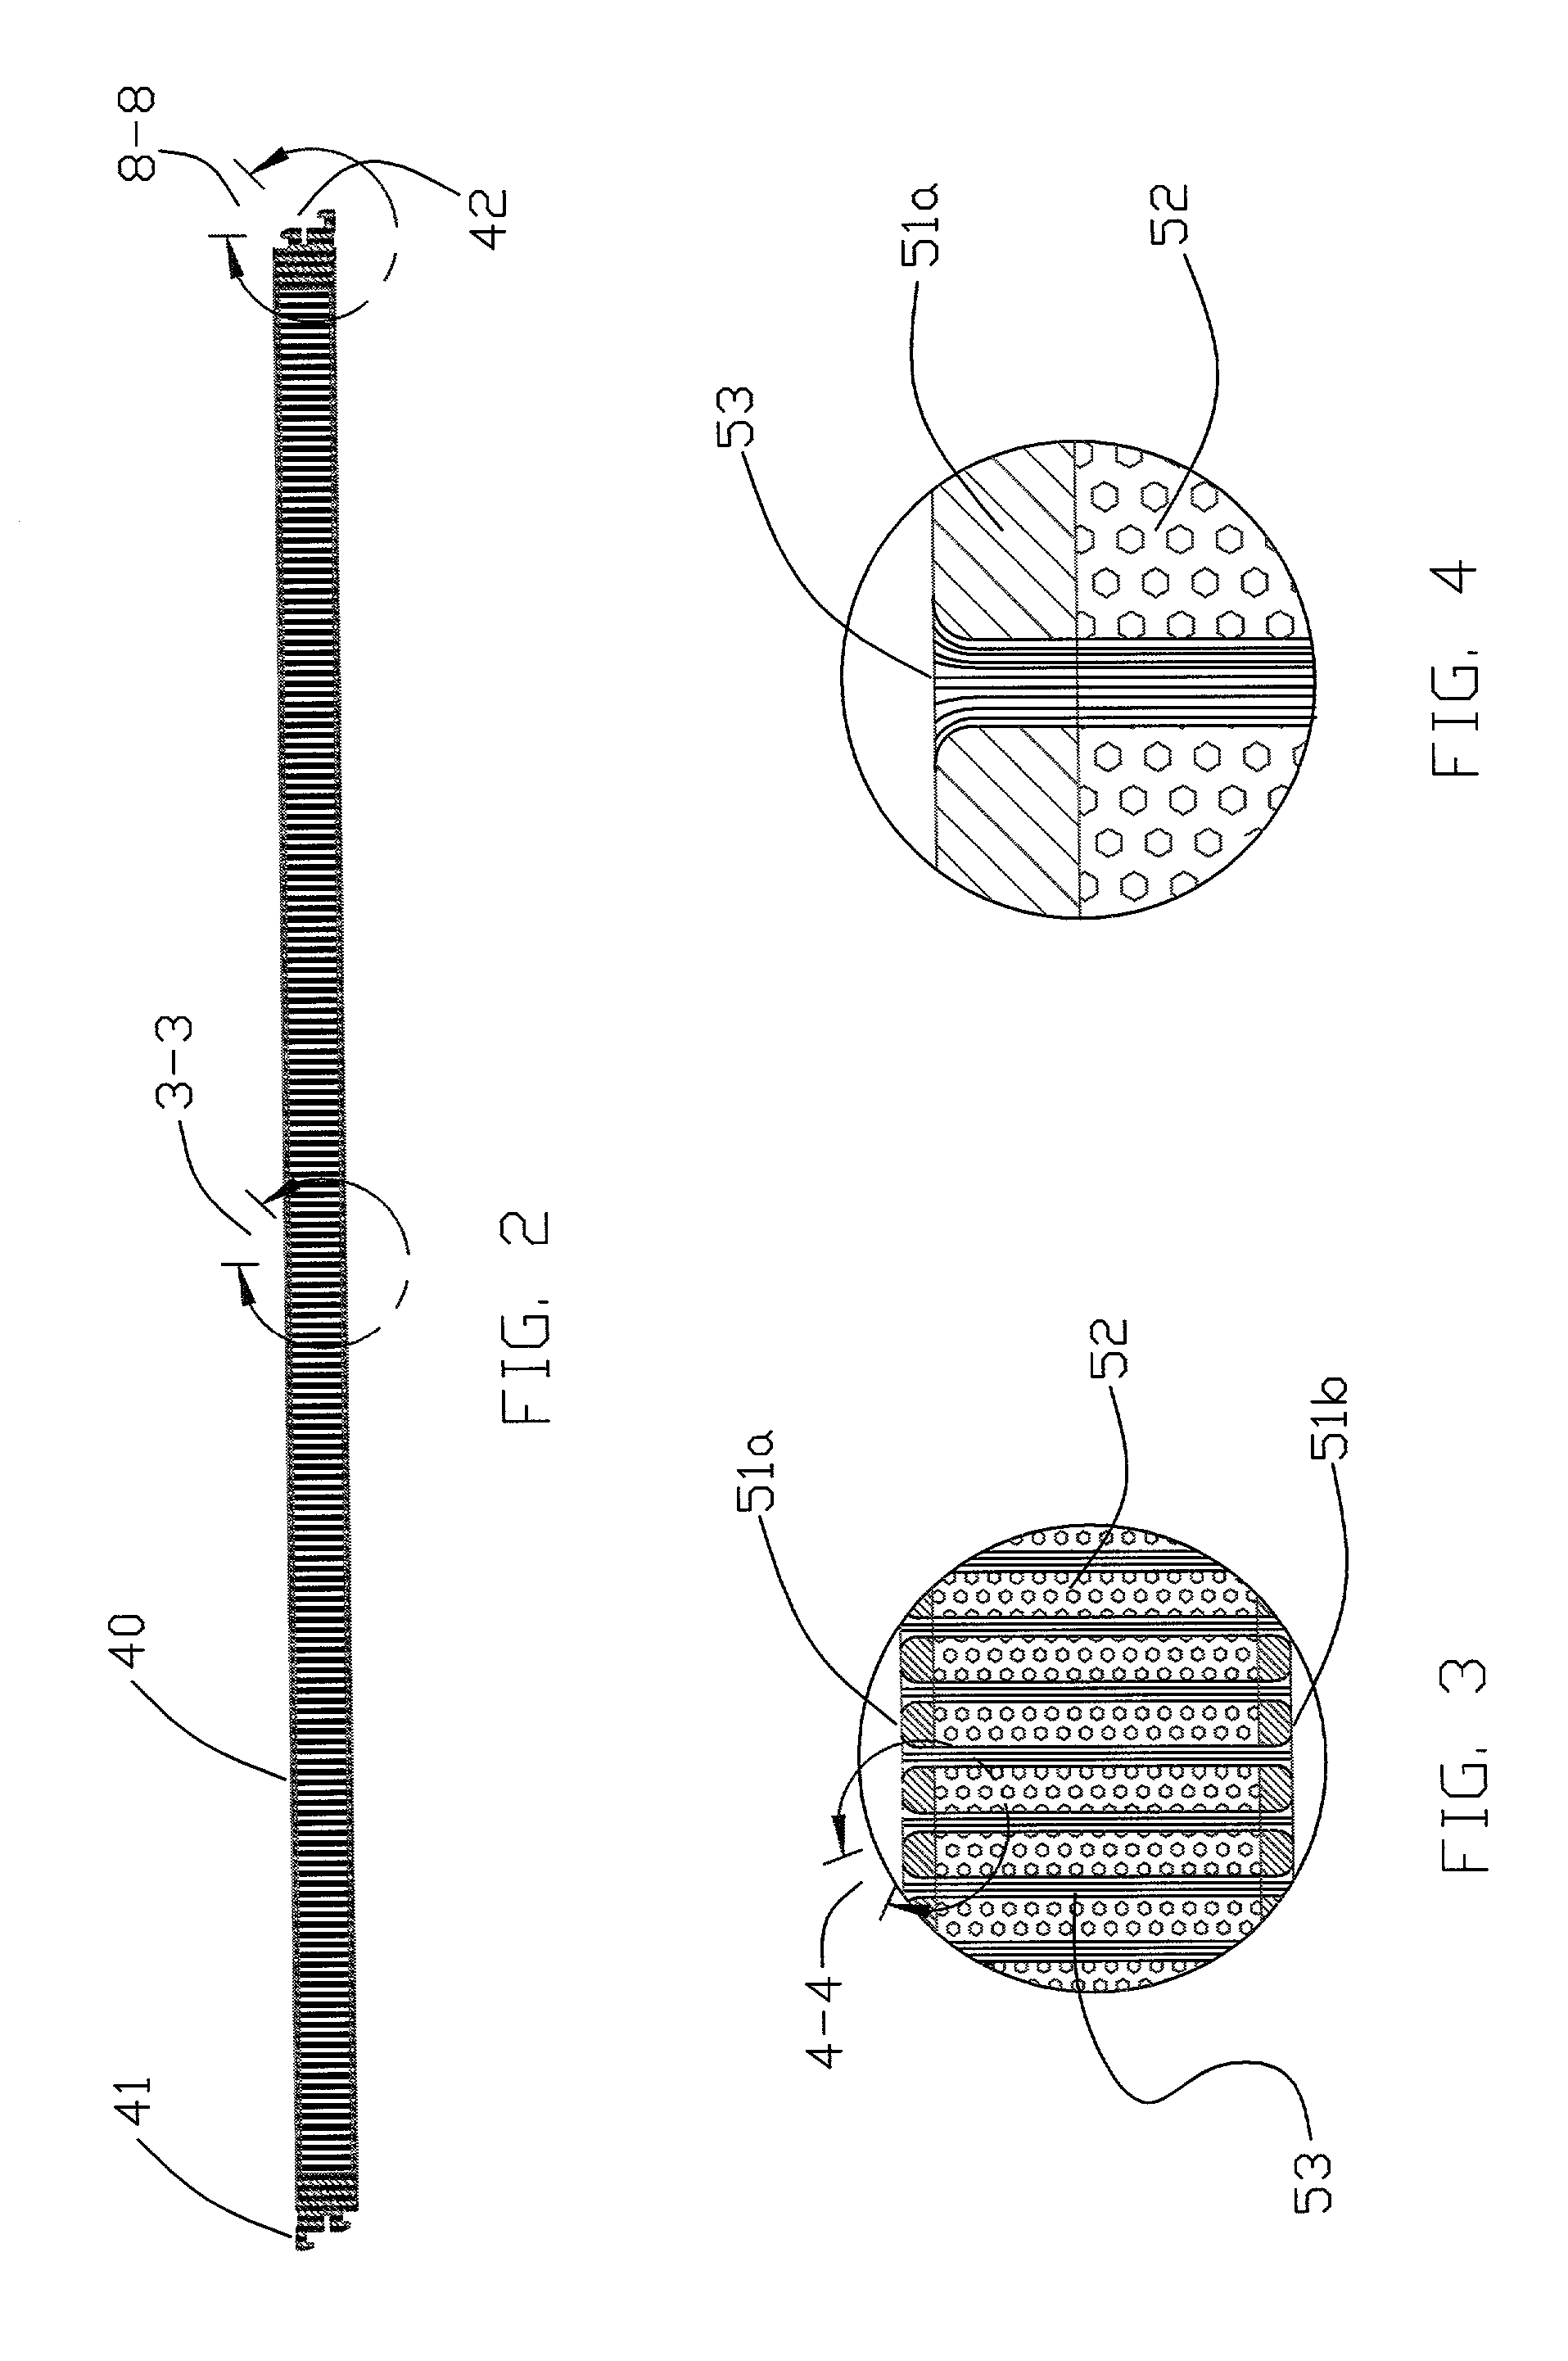 Method of clinching the top and bottom ends of Z-axis fibers into the respective top and bottom surfaces of a composite laminate